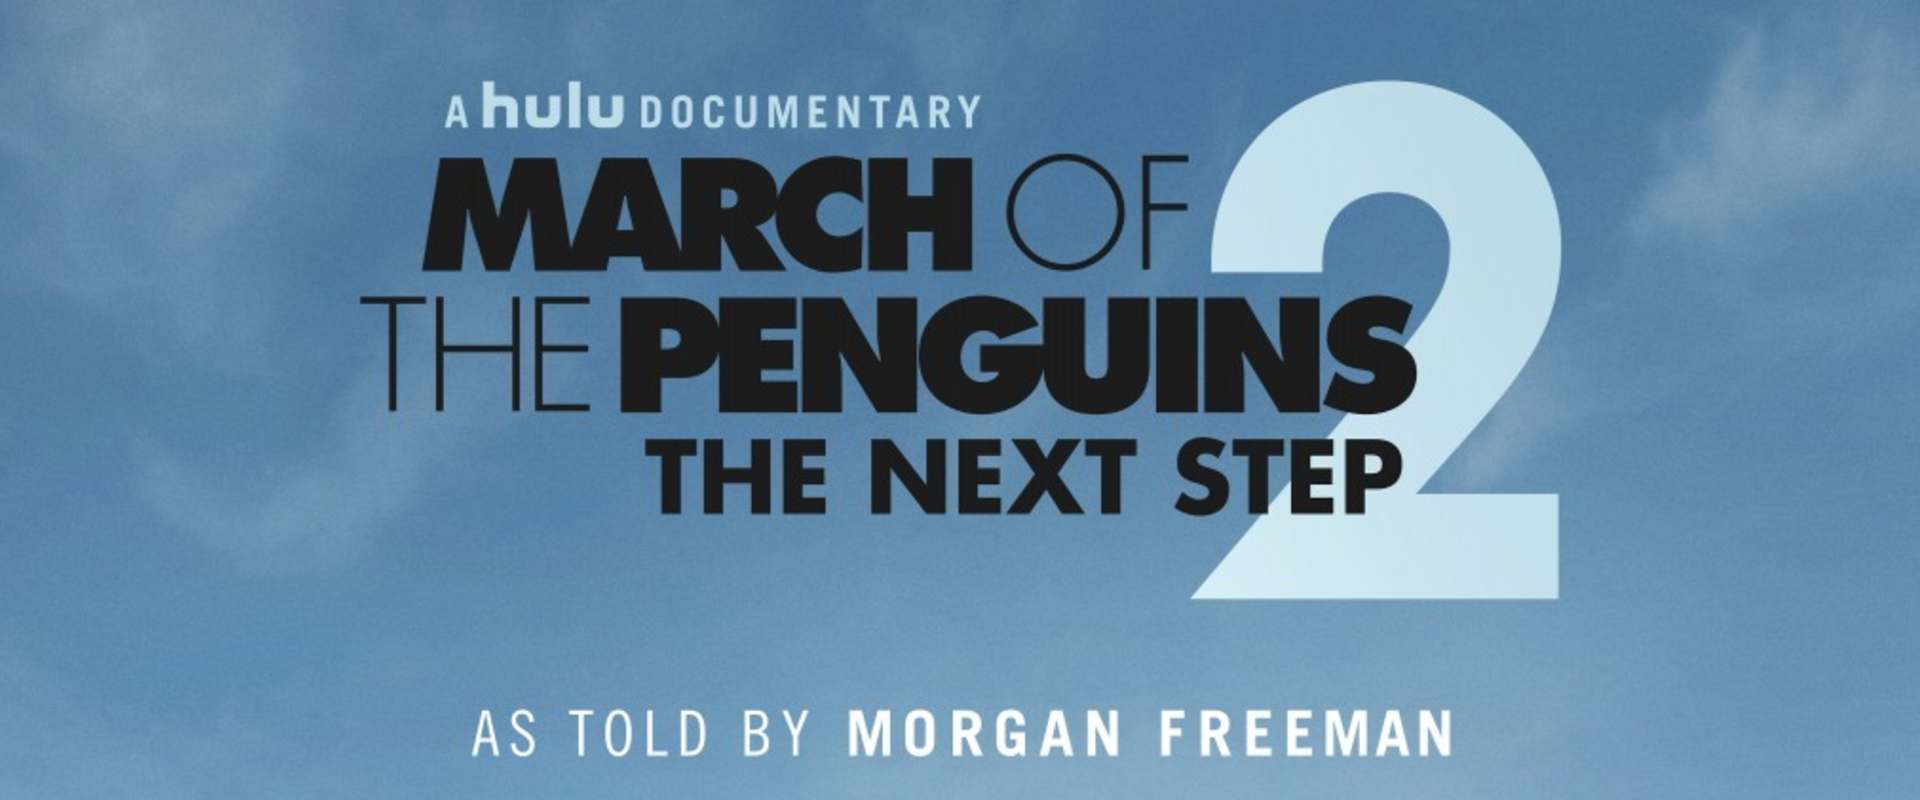 March of the Penguins 2: The Next Step background 1